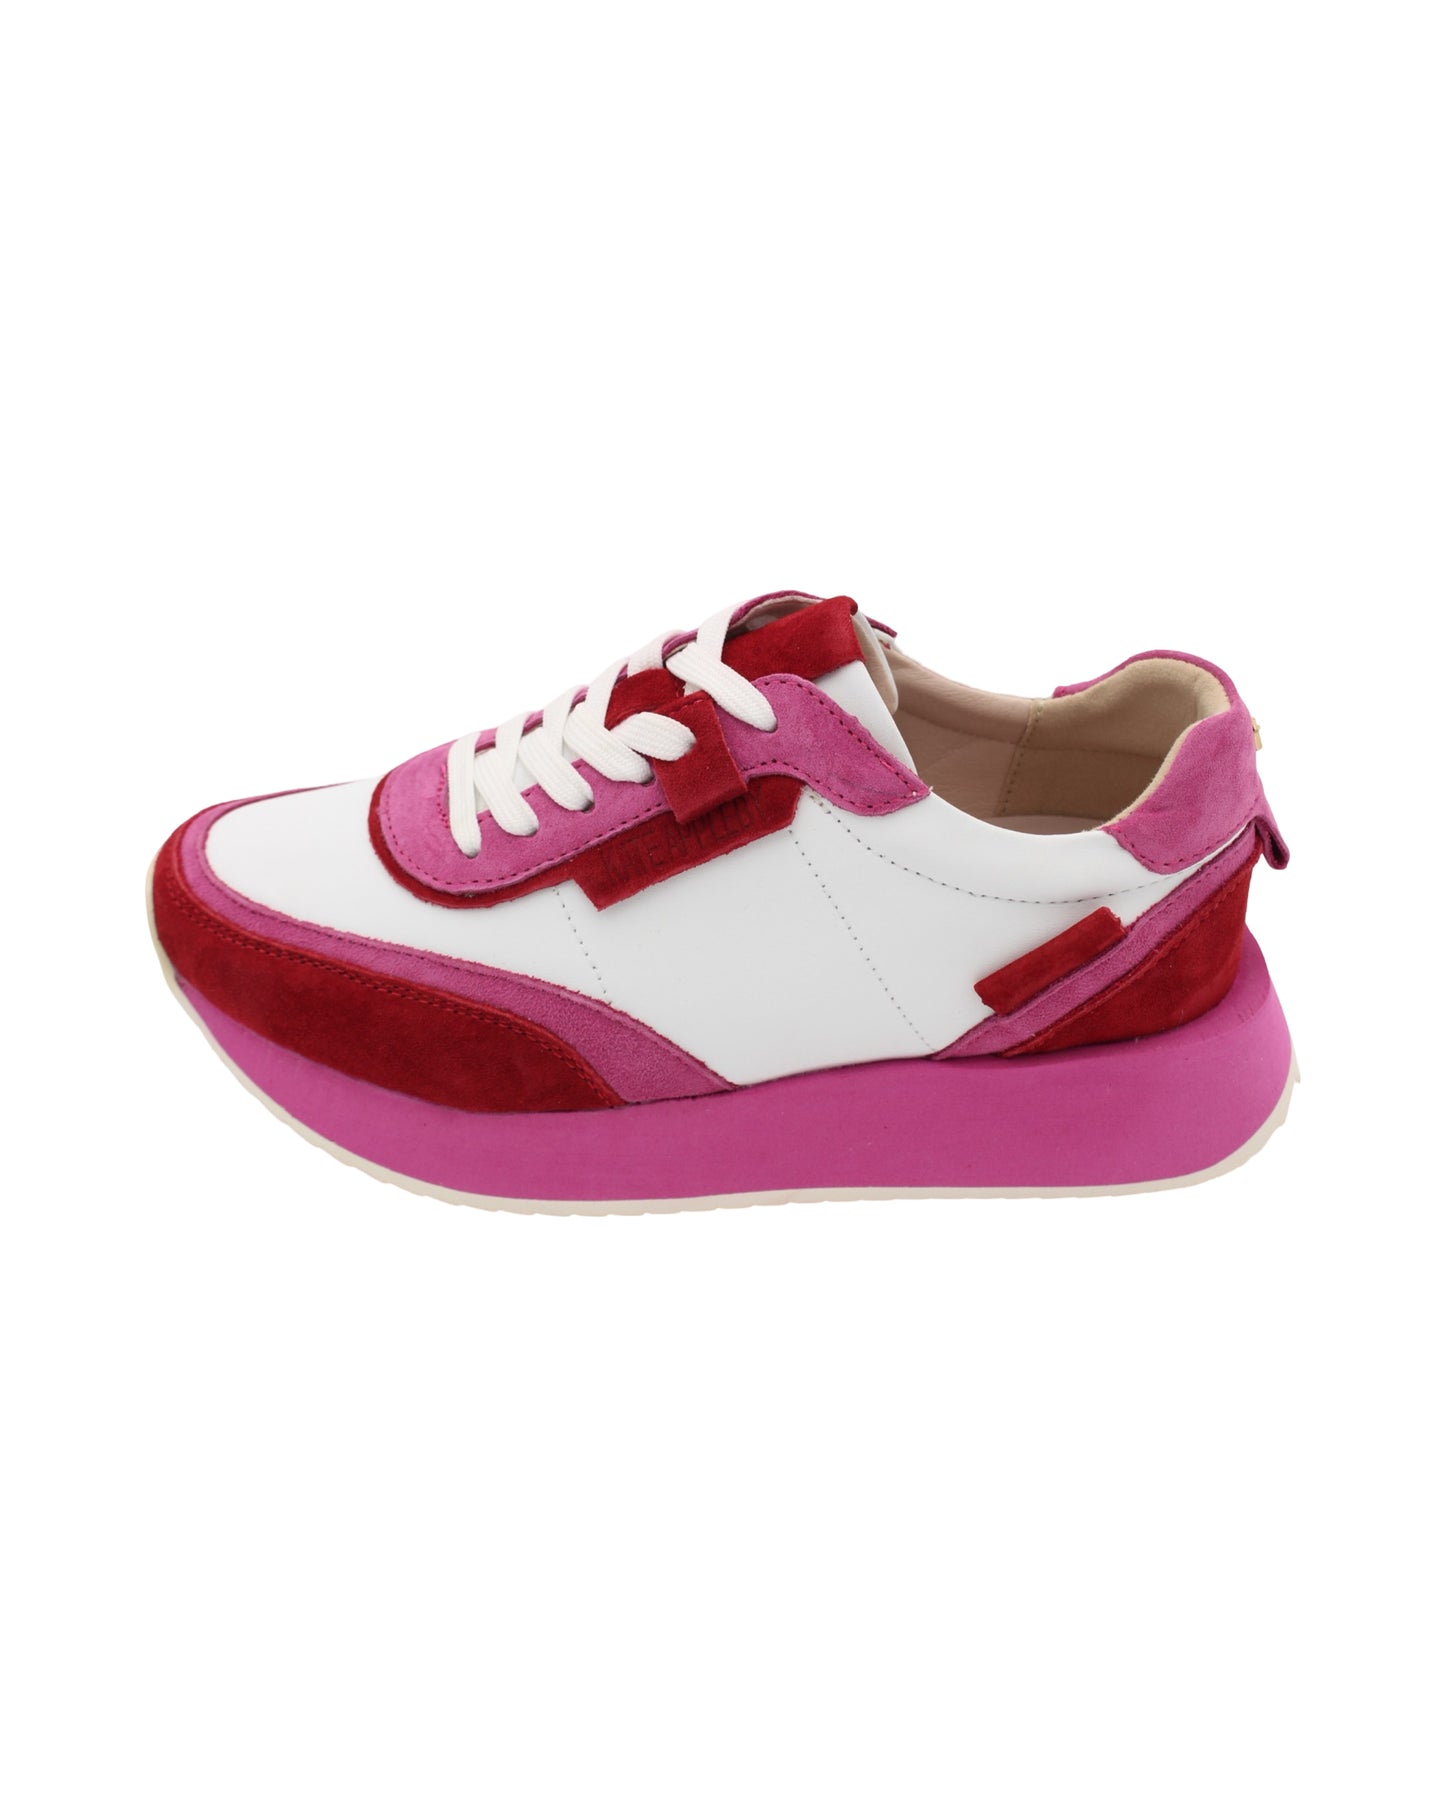 Kate Appleby - Ladies Shoes Trainers Pink (2442)